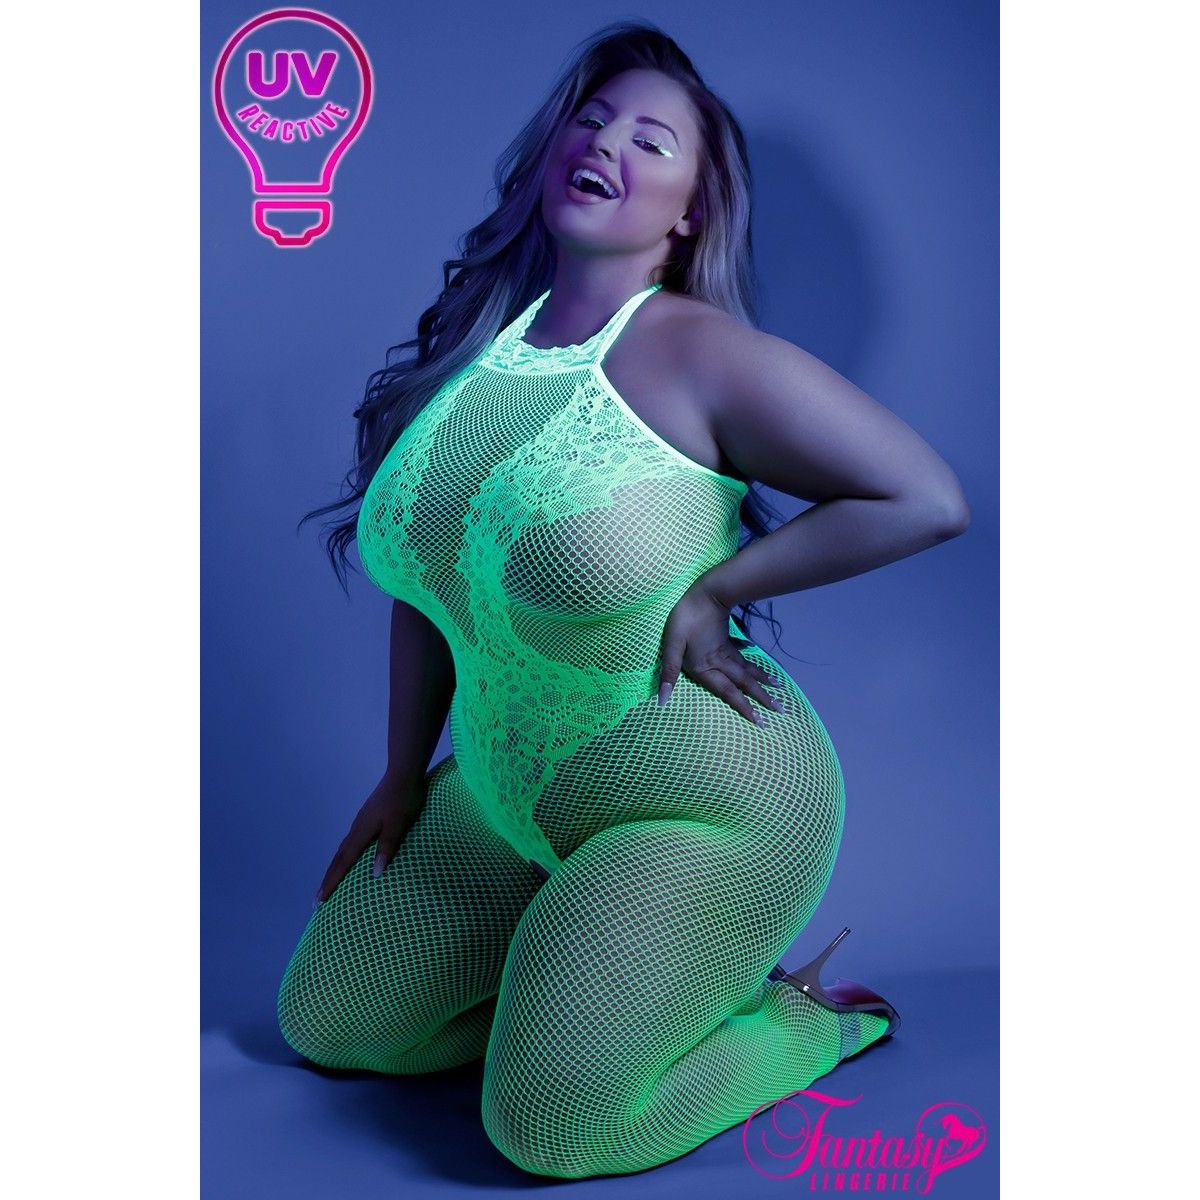 blond female on knees with green fishnet bodystocking front view